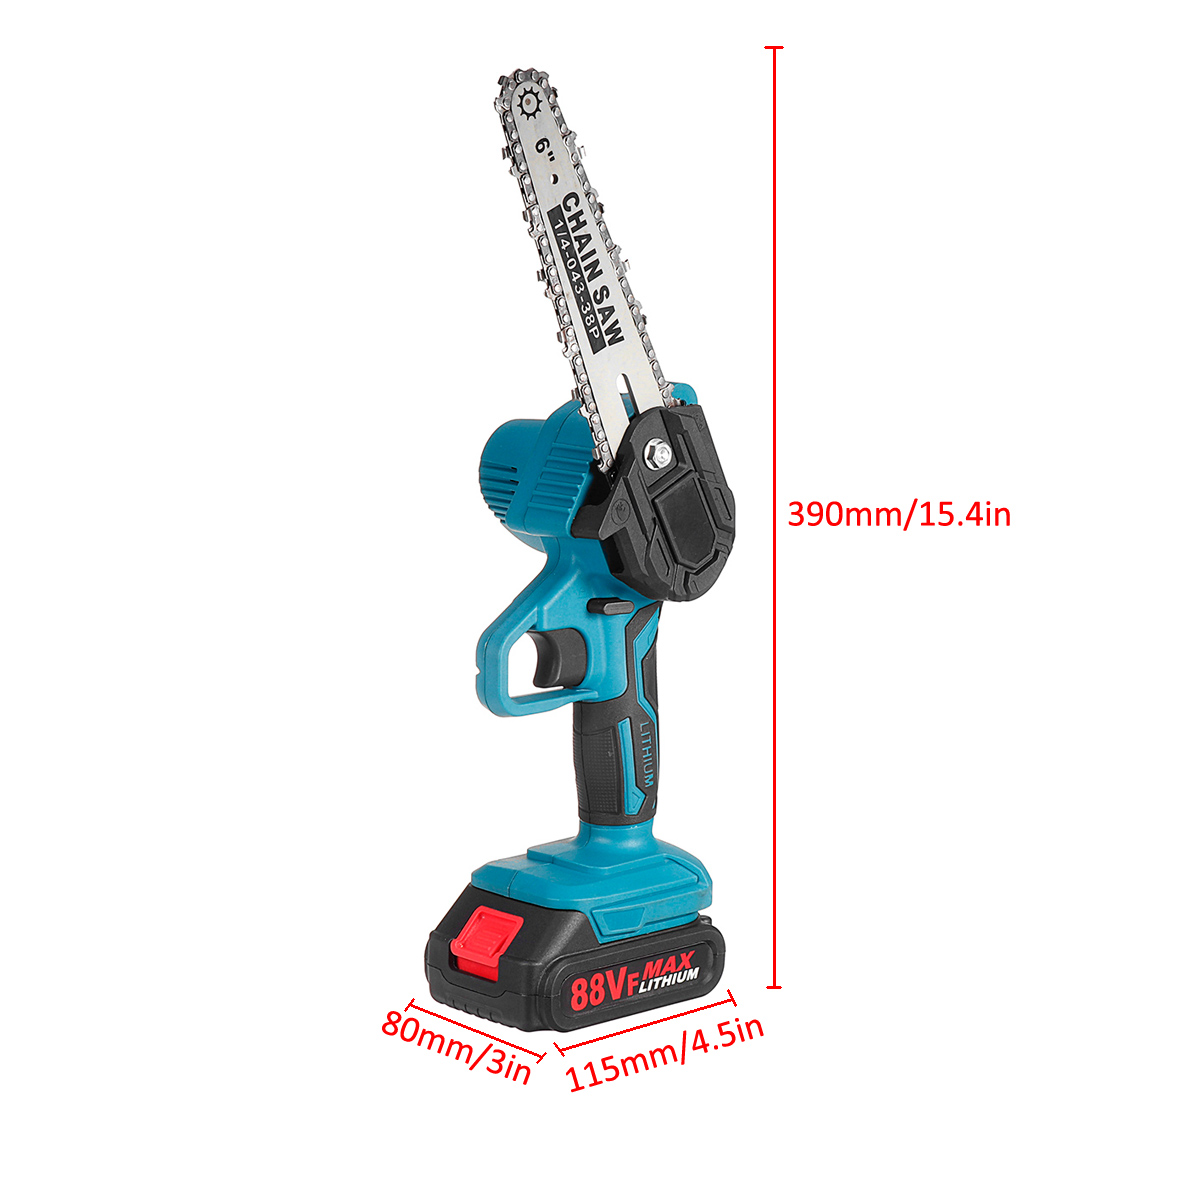 Drillpro-88VF-7500mAh-6in-Cordless-Electric-Chain-Saw-Battery-Indicator-Wood-Cutter-One-Hand-Saw-Woo-1868437-17